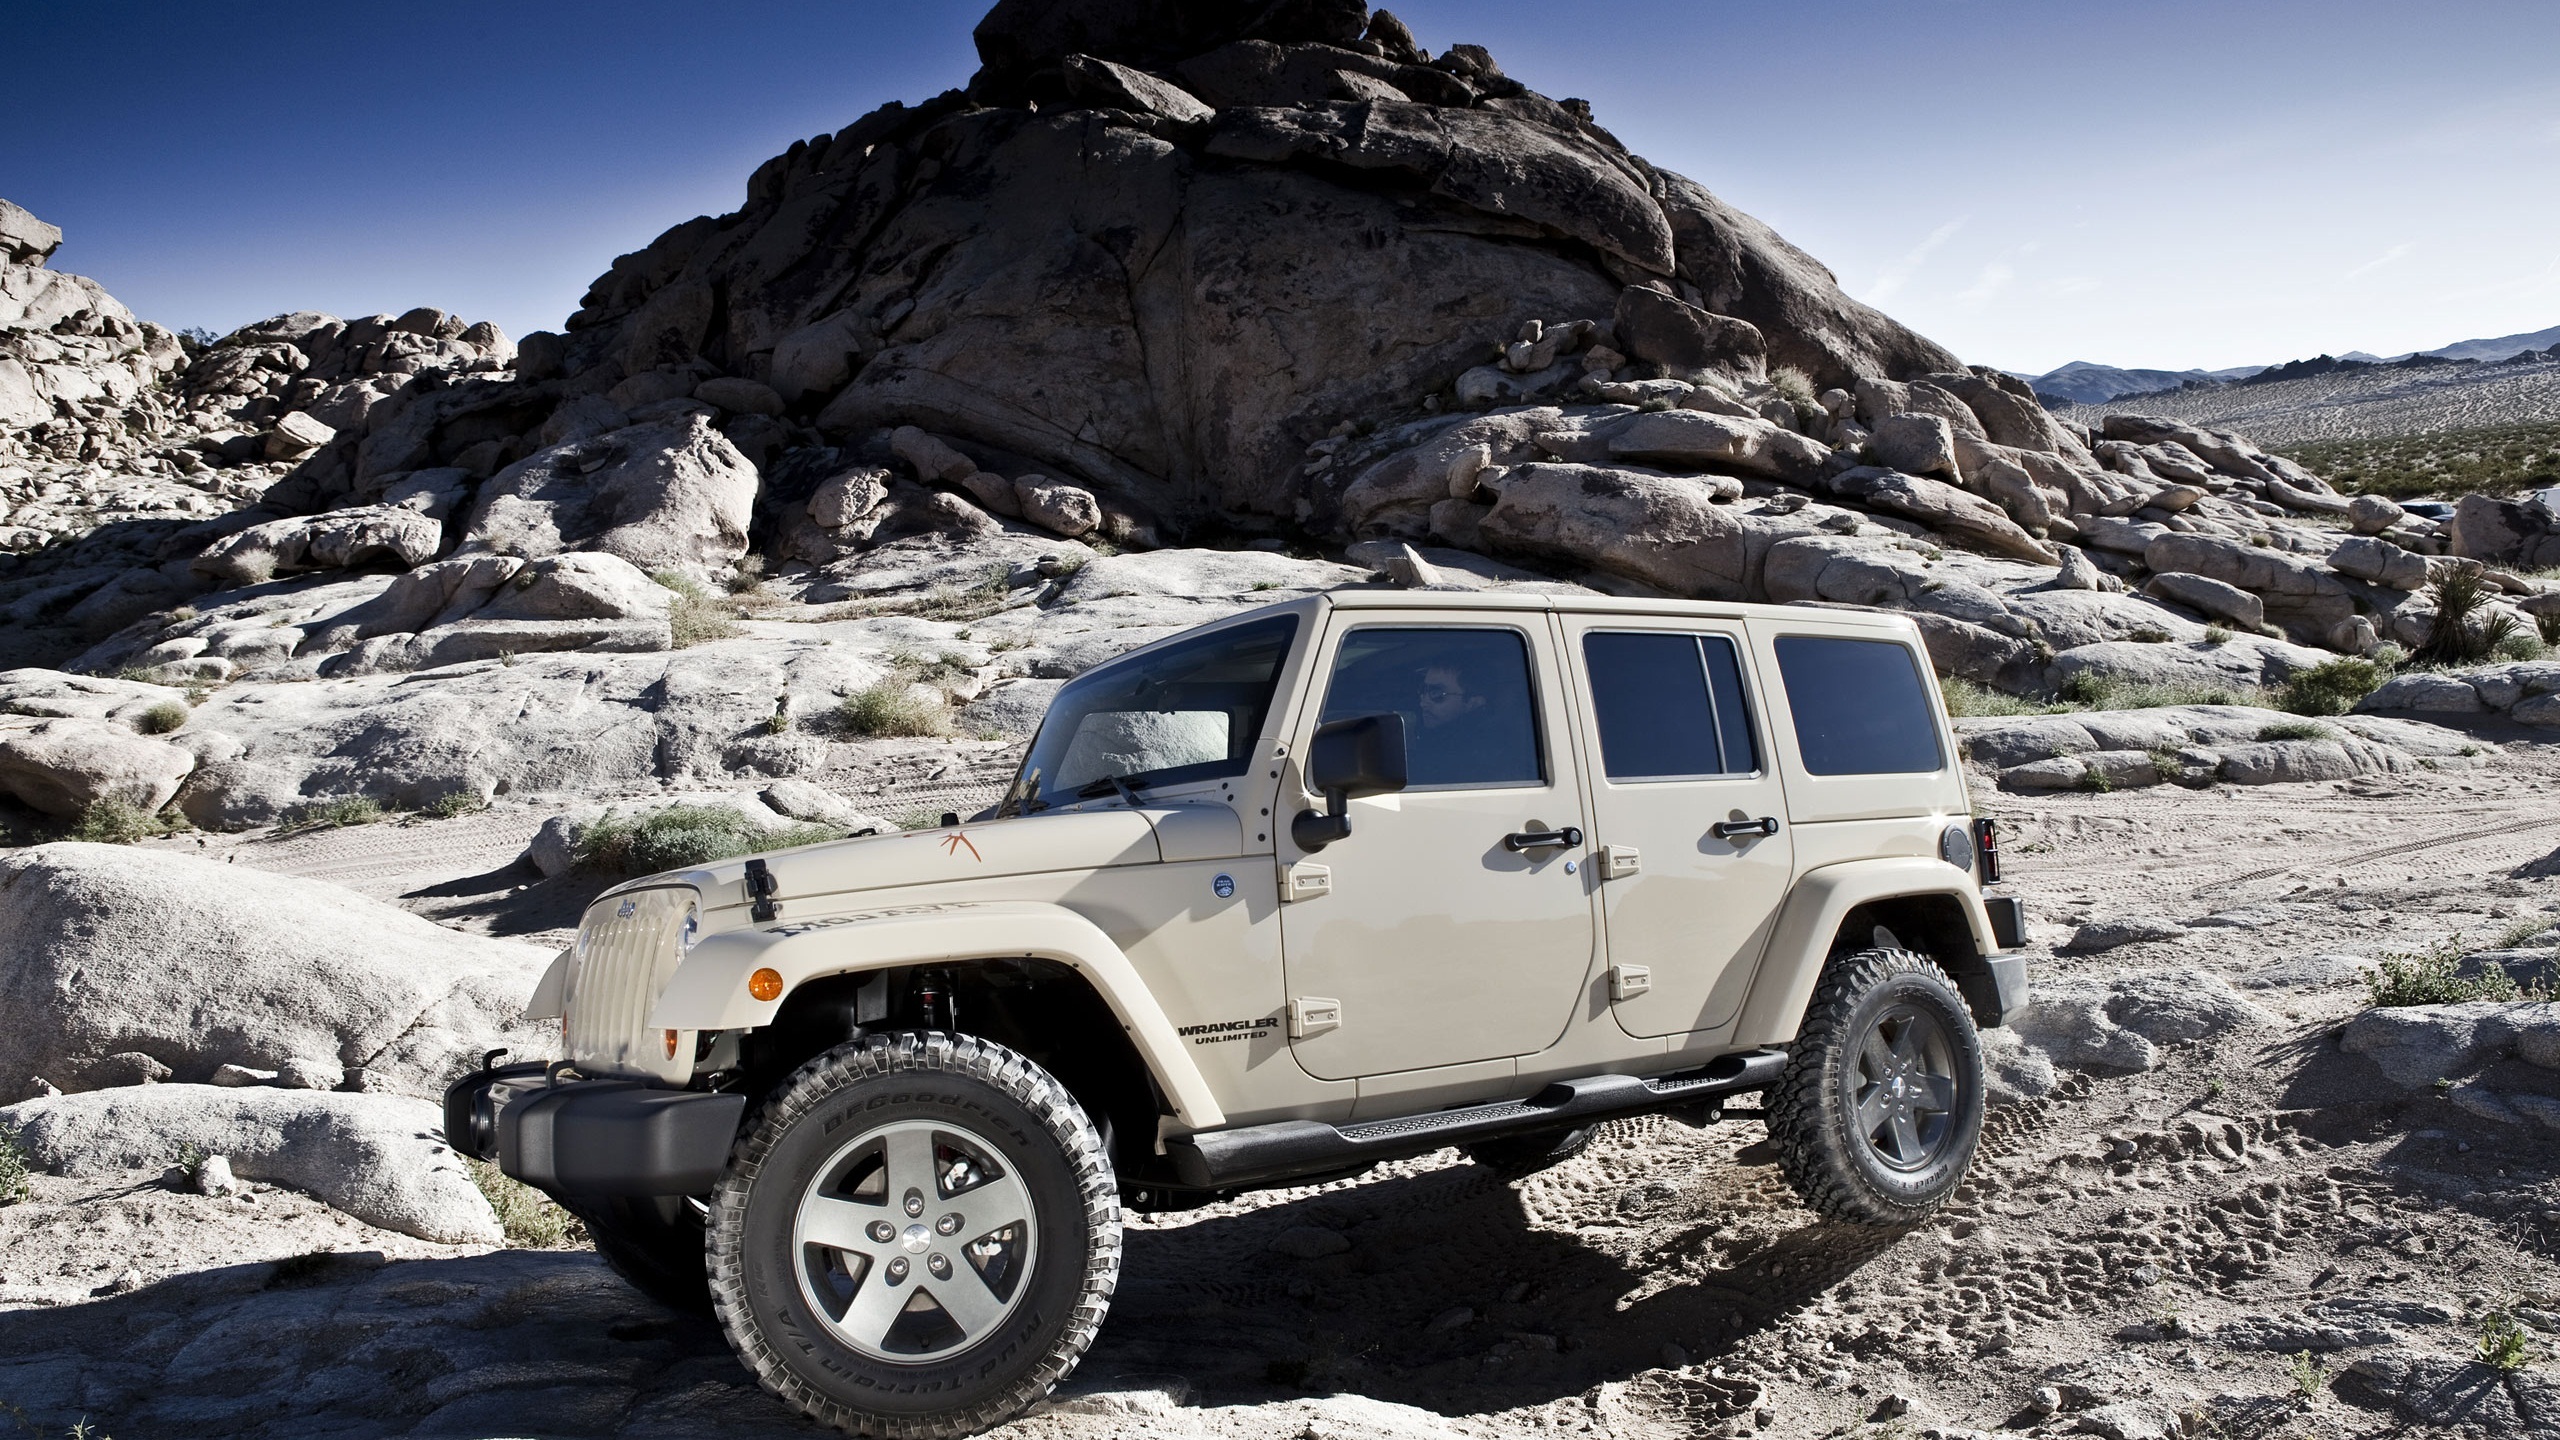 Gorgeous Jeep Wrangler Wallpaper | Full HD Pictures